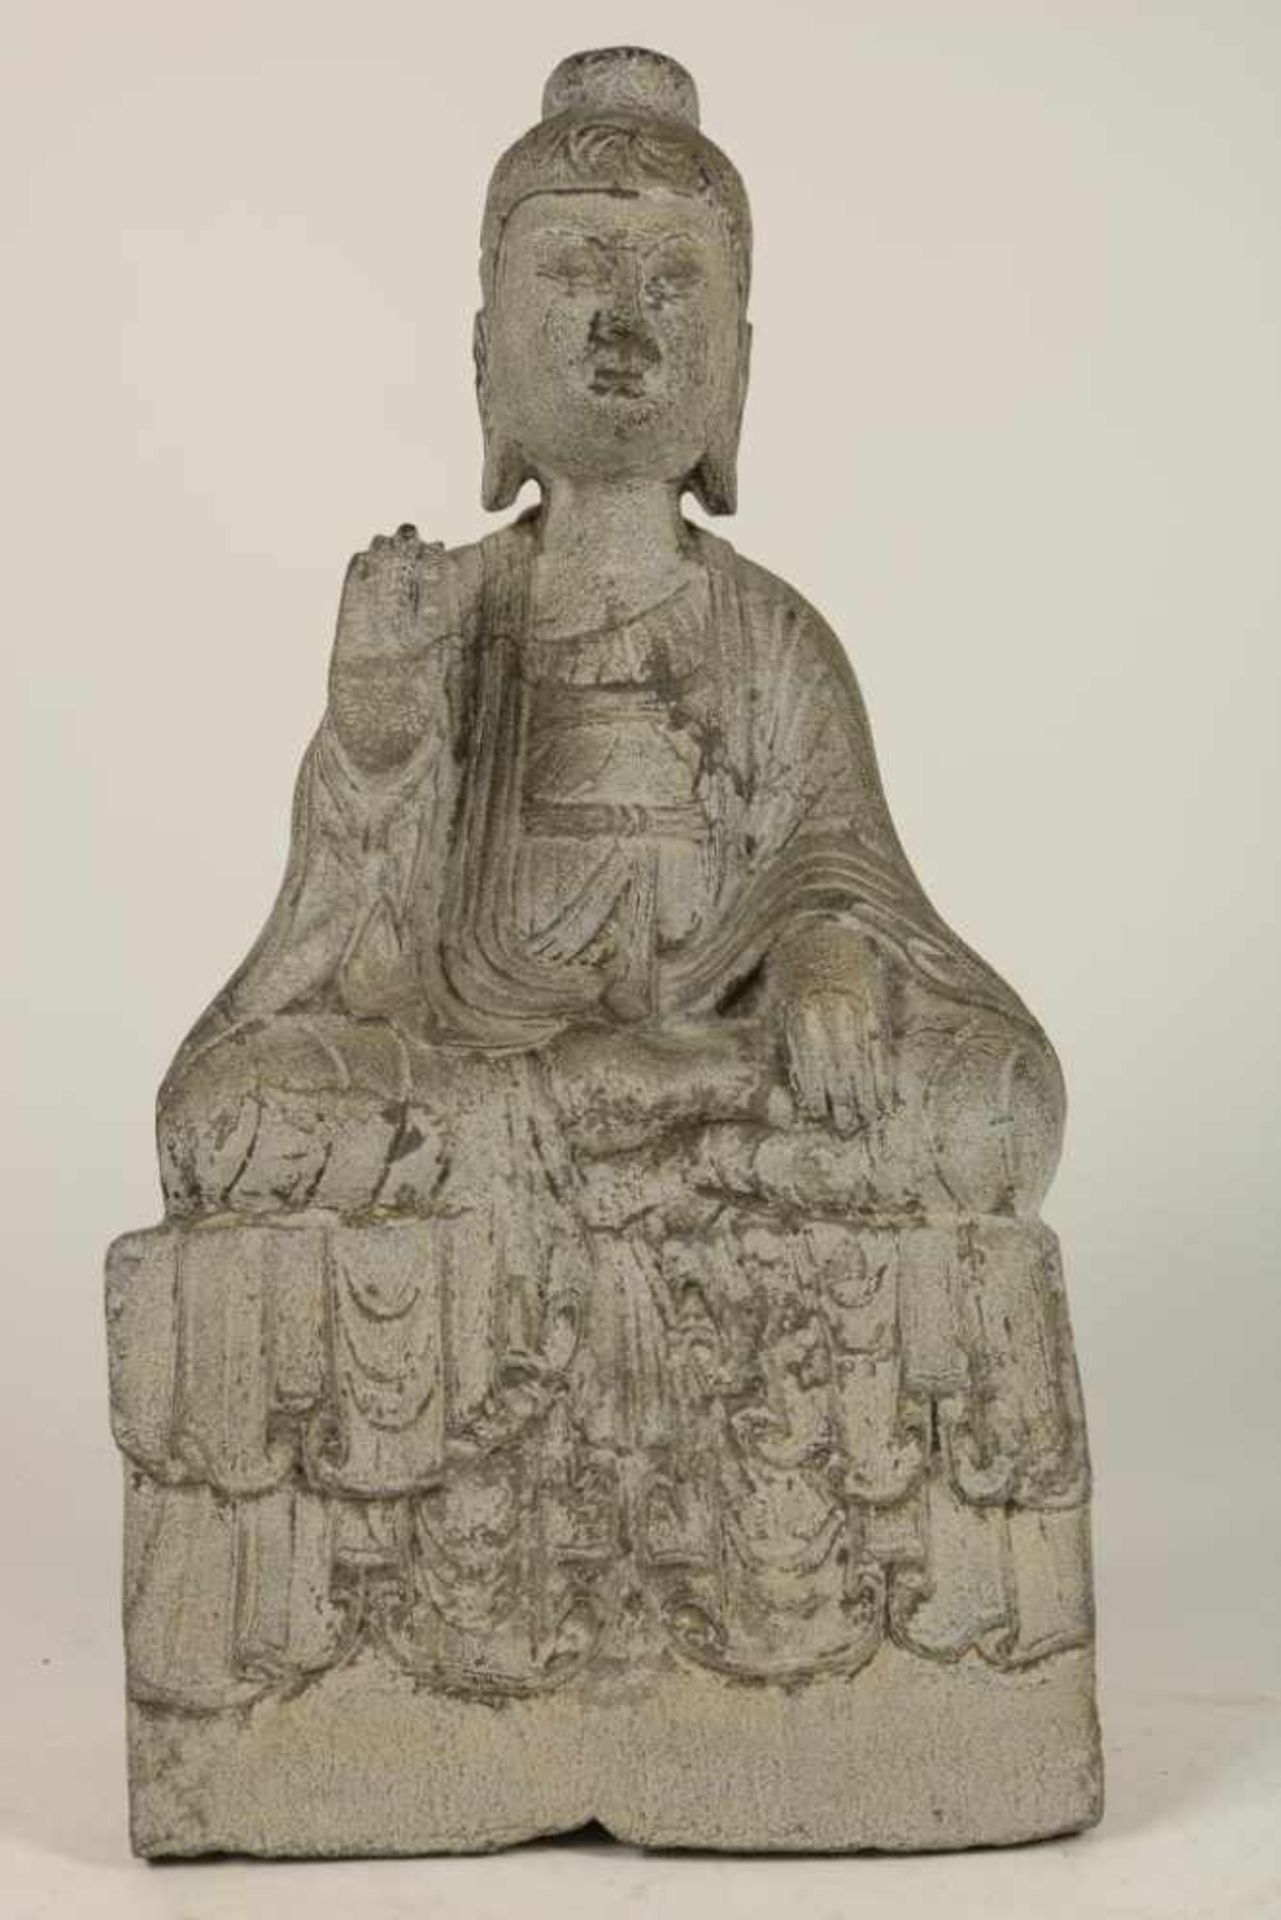 Stone sculpture of Boeddha, back side with Chinese text, China 20 th century, h. 42 cm.